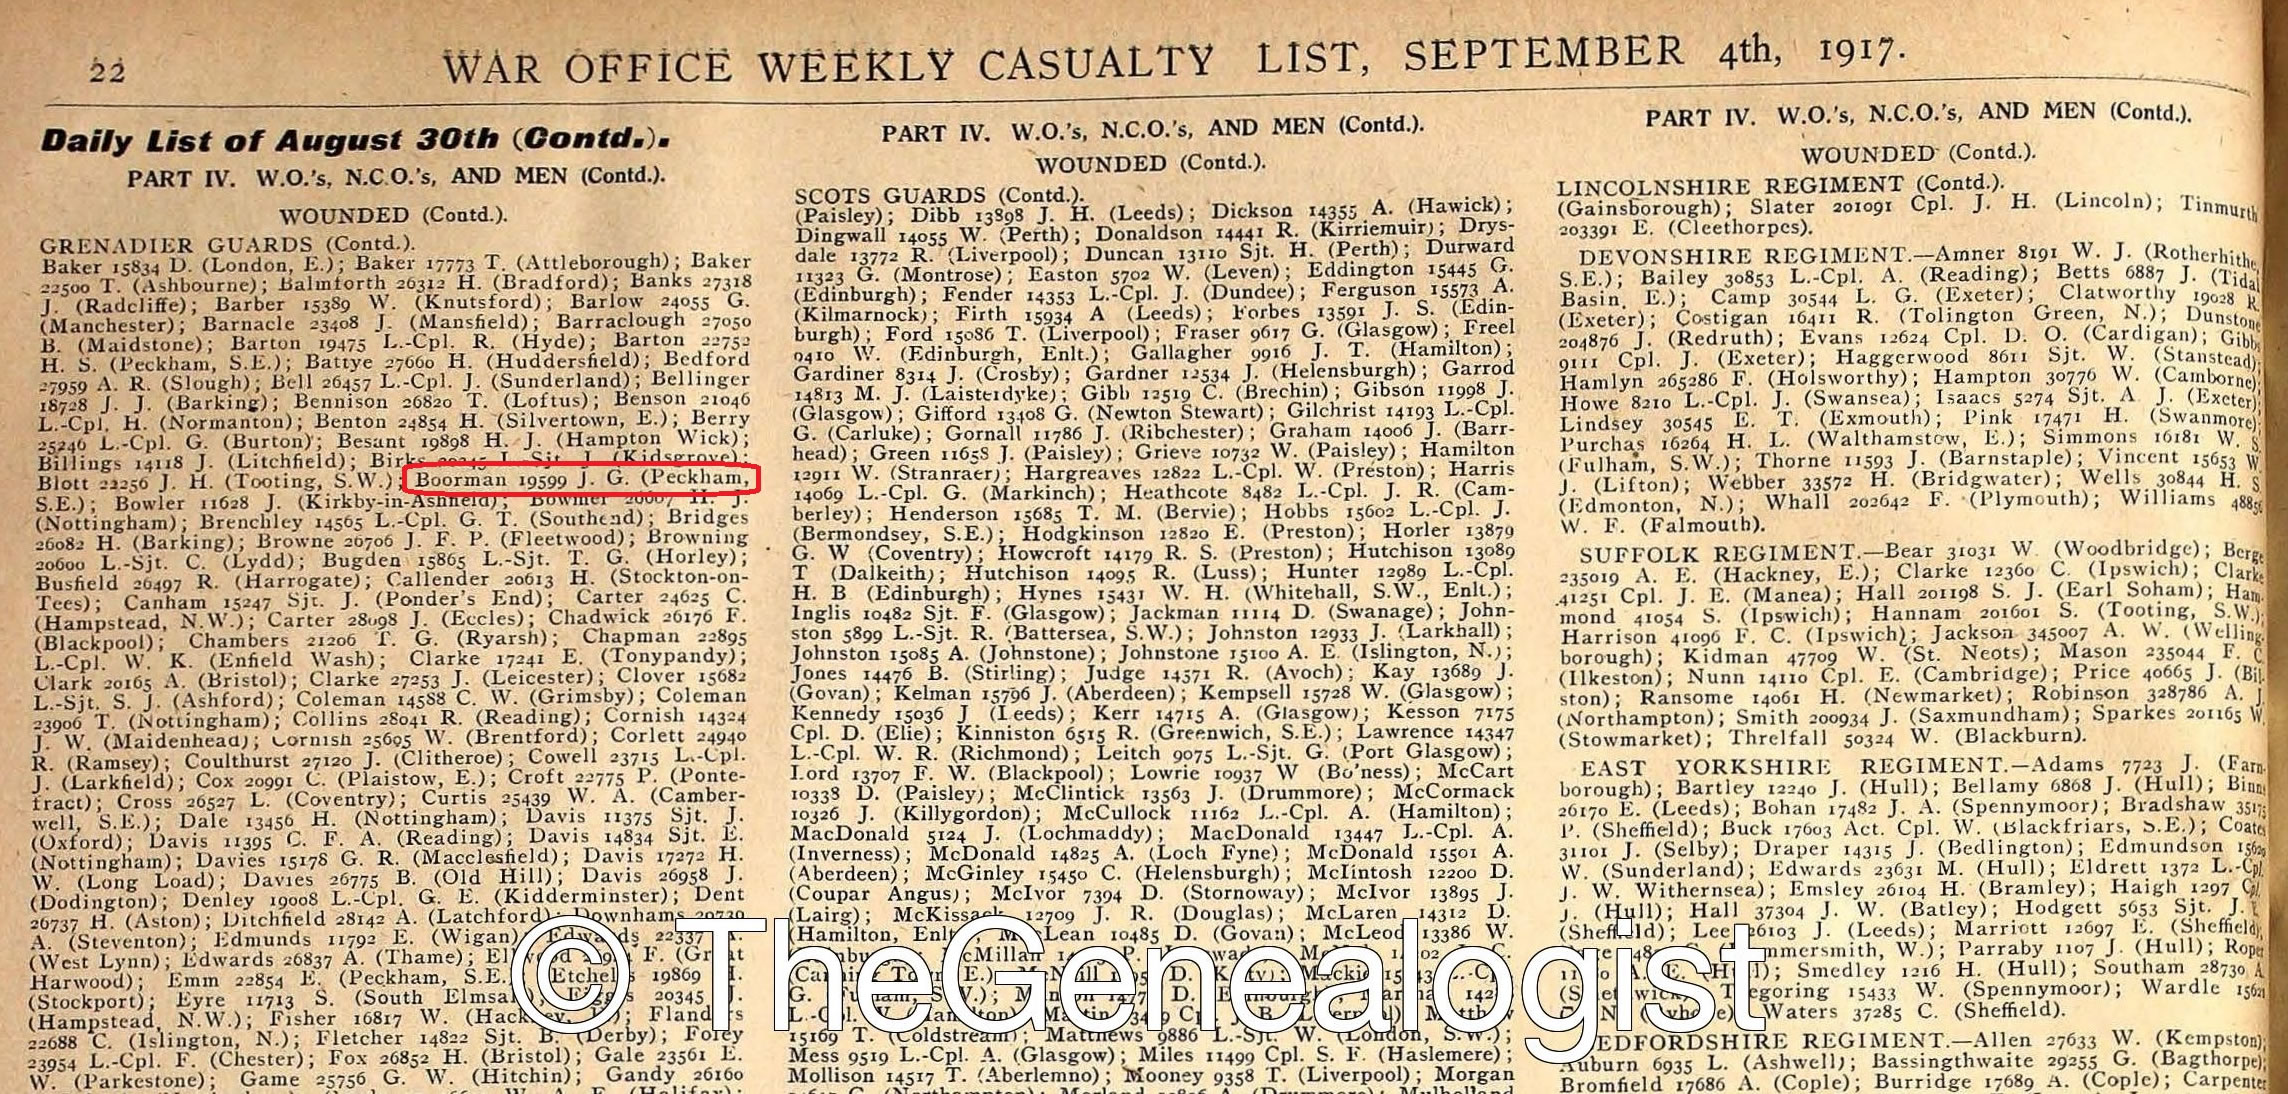 War Office Weekly Casualty List dated 4th September 1917 found in TheGenealogist's Military Records